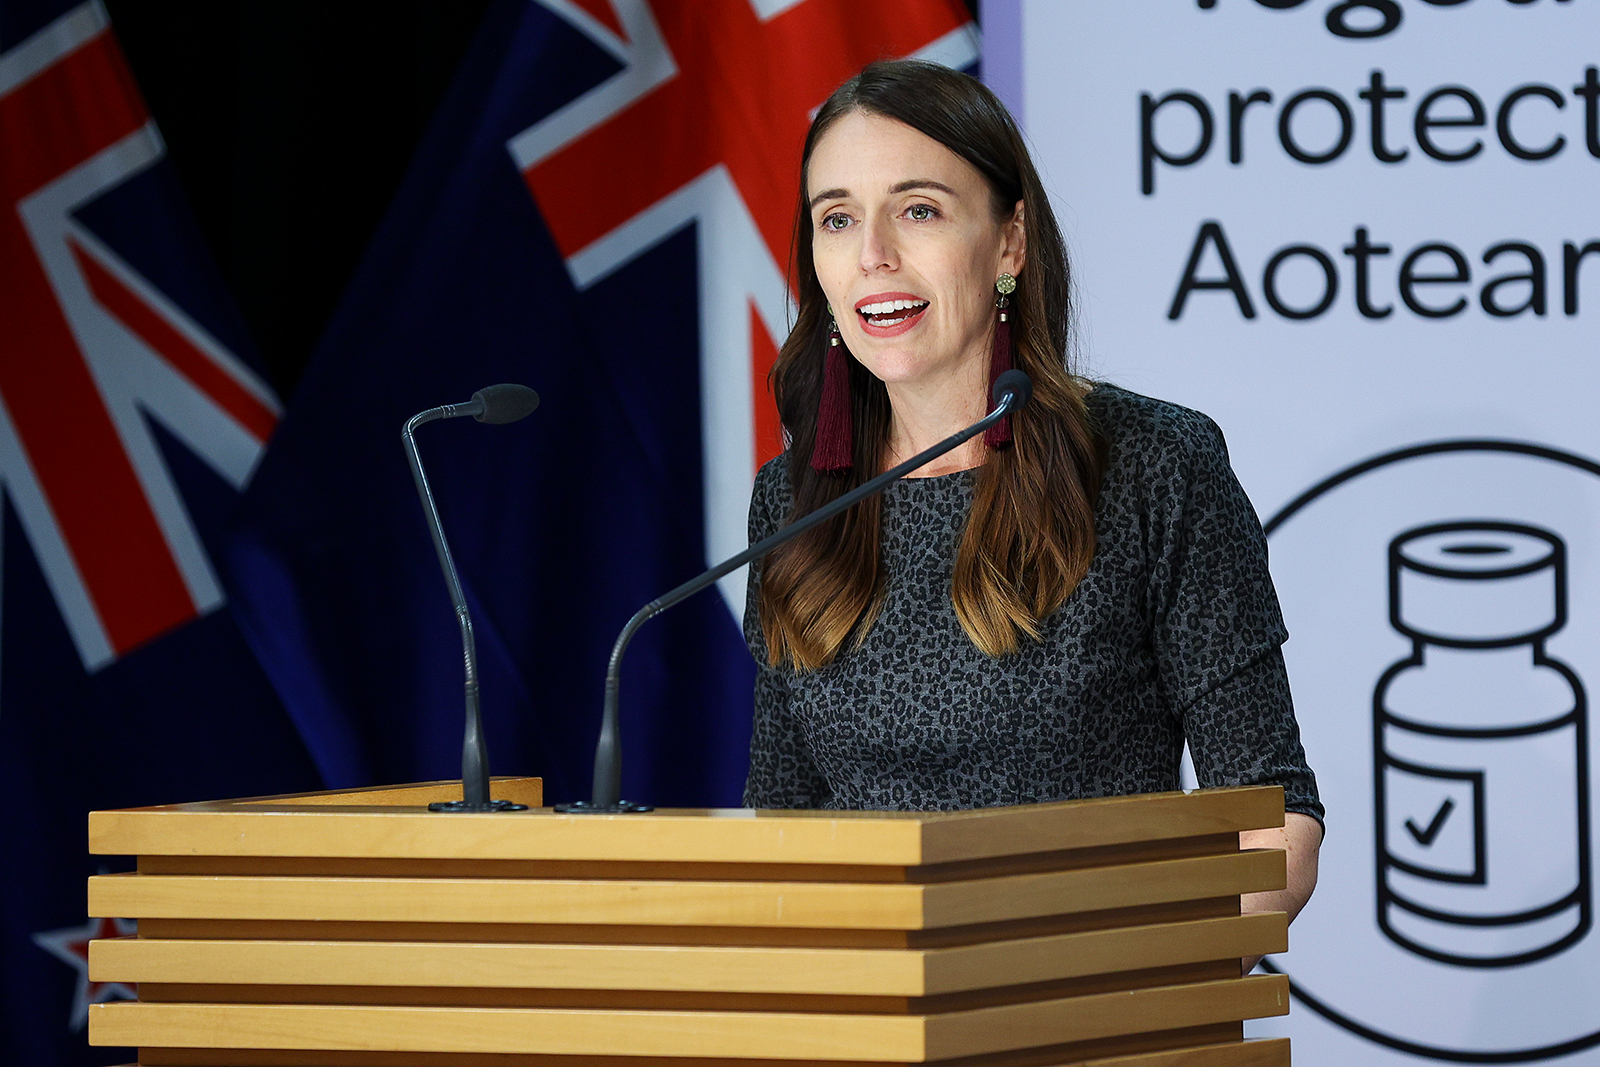 Prime Minister Jacinda Ardern speaks to the media during a news conference at Parliament in Wellington, New Zealand, on April 6.